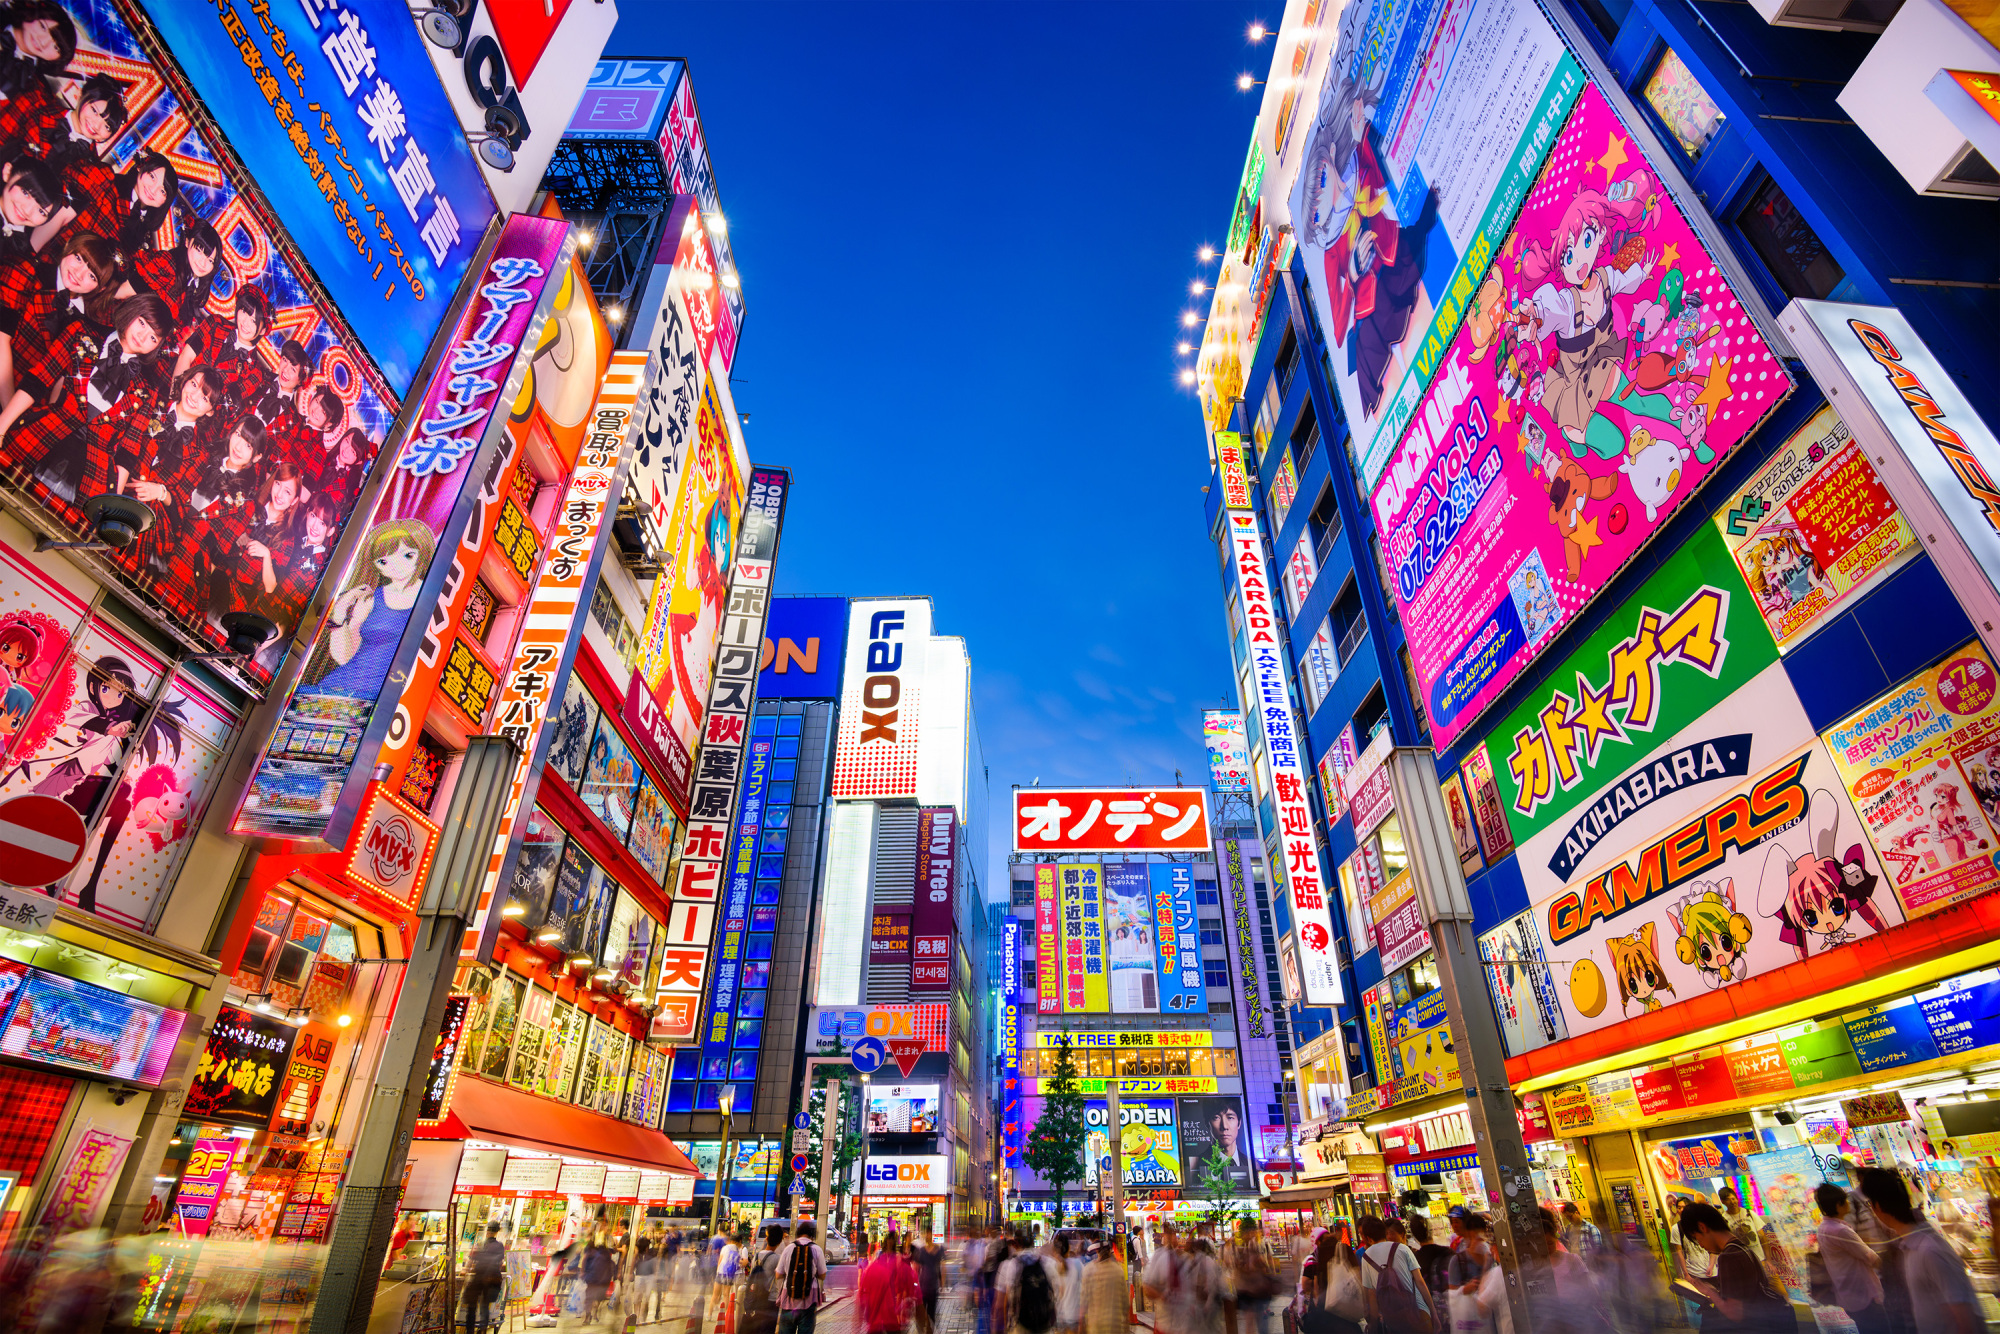 Colorful capital: Crowds pass below signs in Tokyo's Akihabara district. | GETTY IMAGES